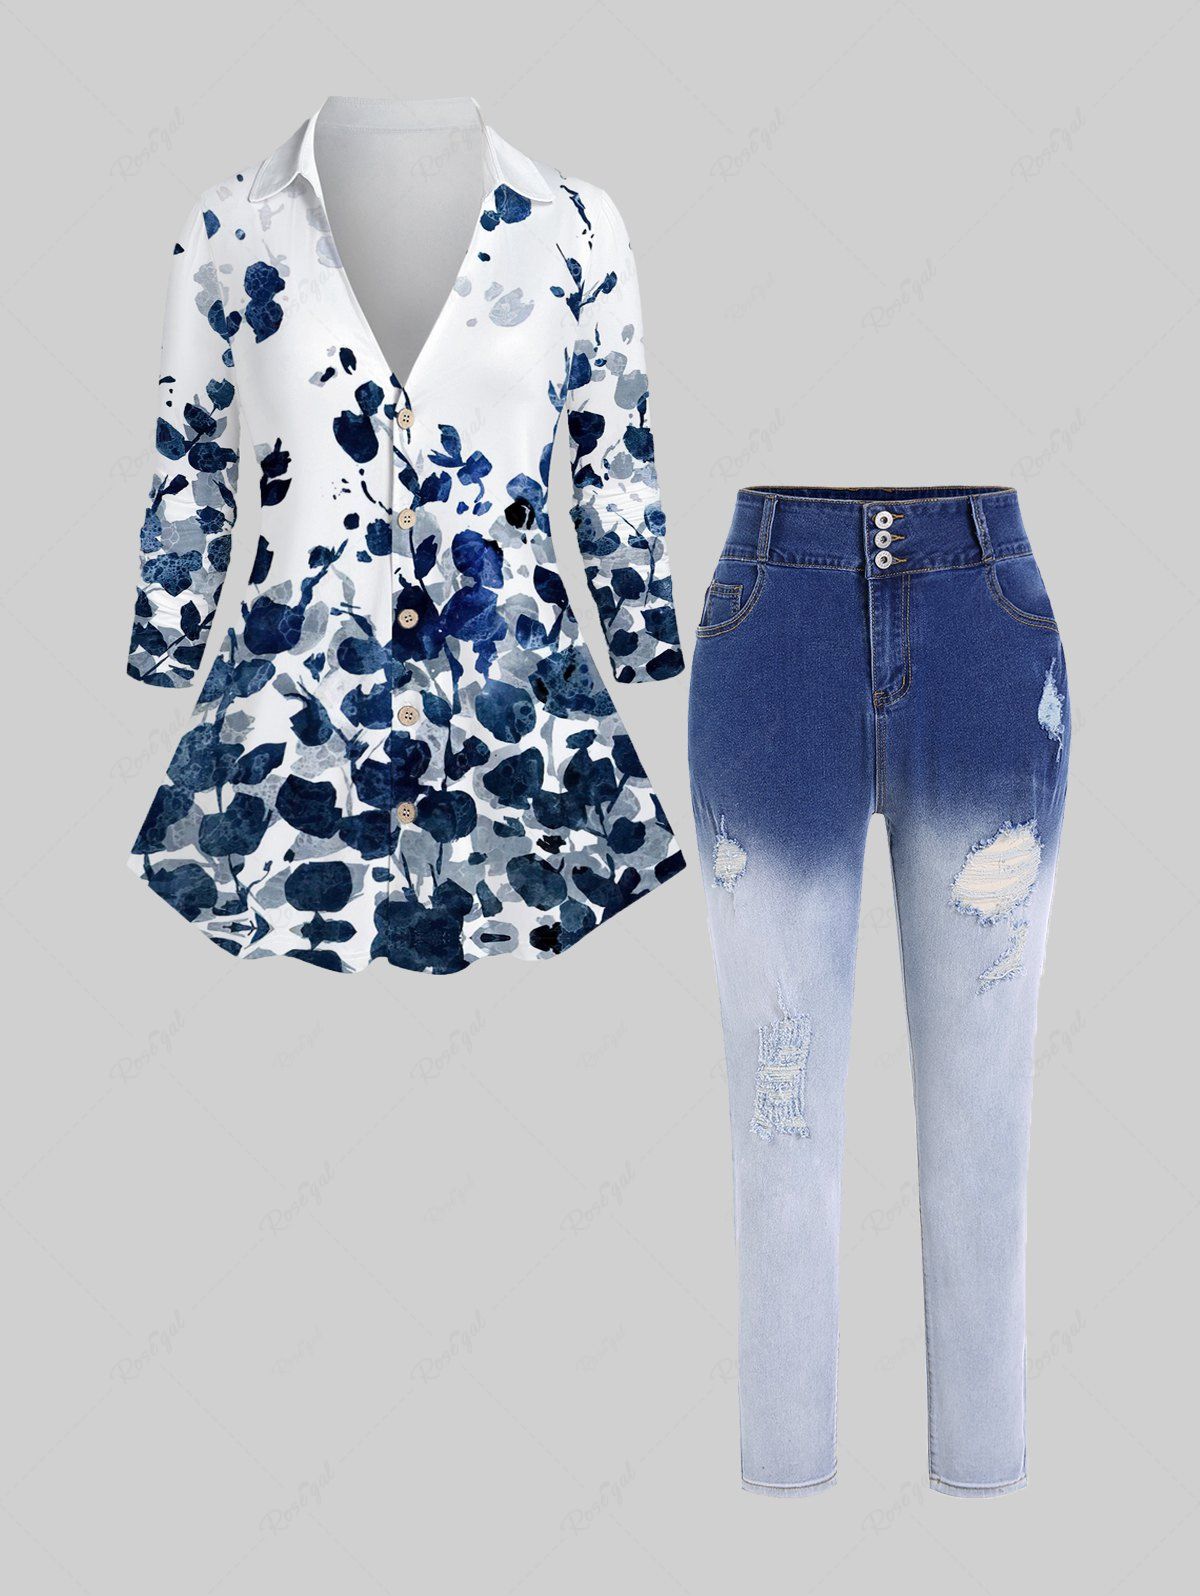 Chic Plus Size Ink Printing Long Sleeves Shirt and Dip Dye Ripped Pencil Jeans Outfit  